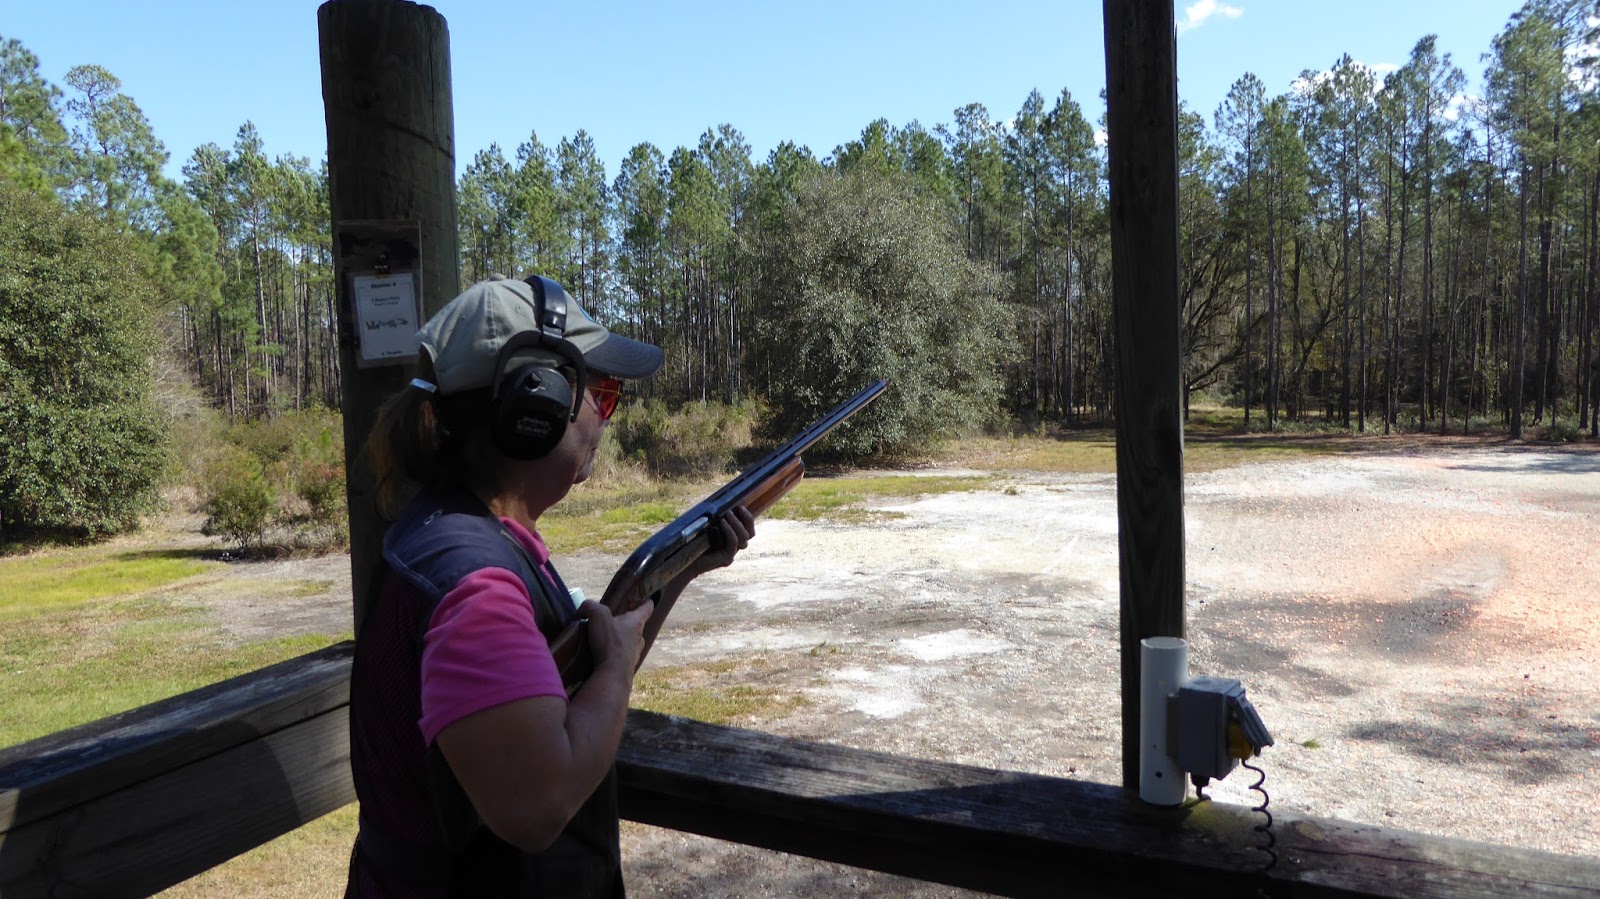 The Lost Target: Feb 12, 2016 @ WW Sporting Clays